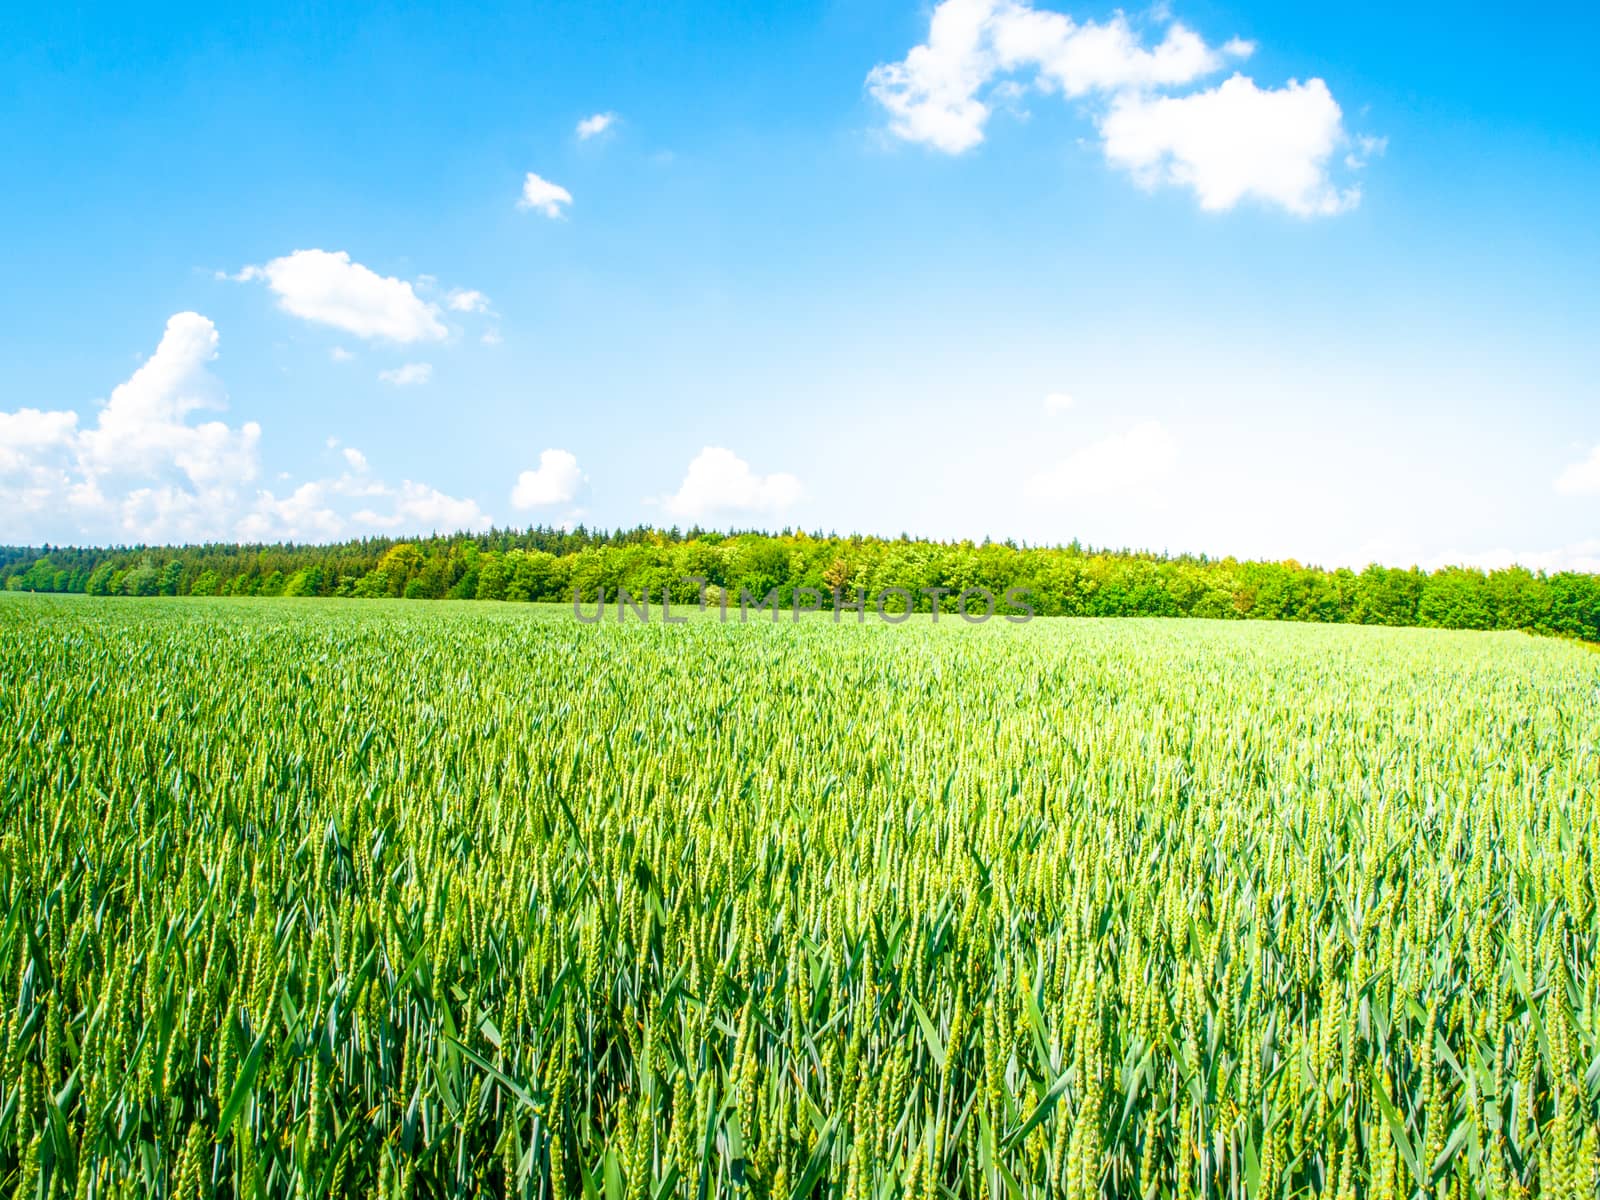 Green spring field of grain on sunny day with blue sky and white clouds. Natural, agricultural and rural landscape walpaper by pyty